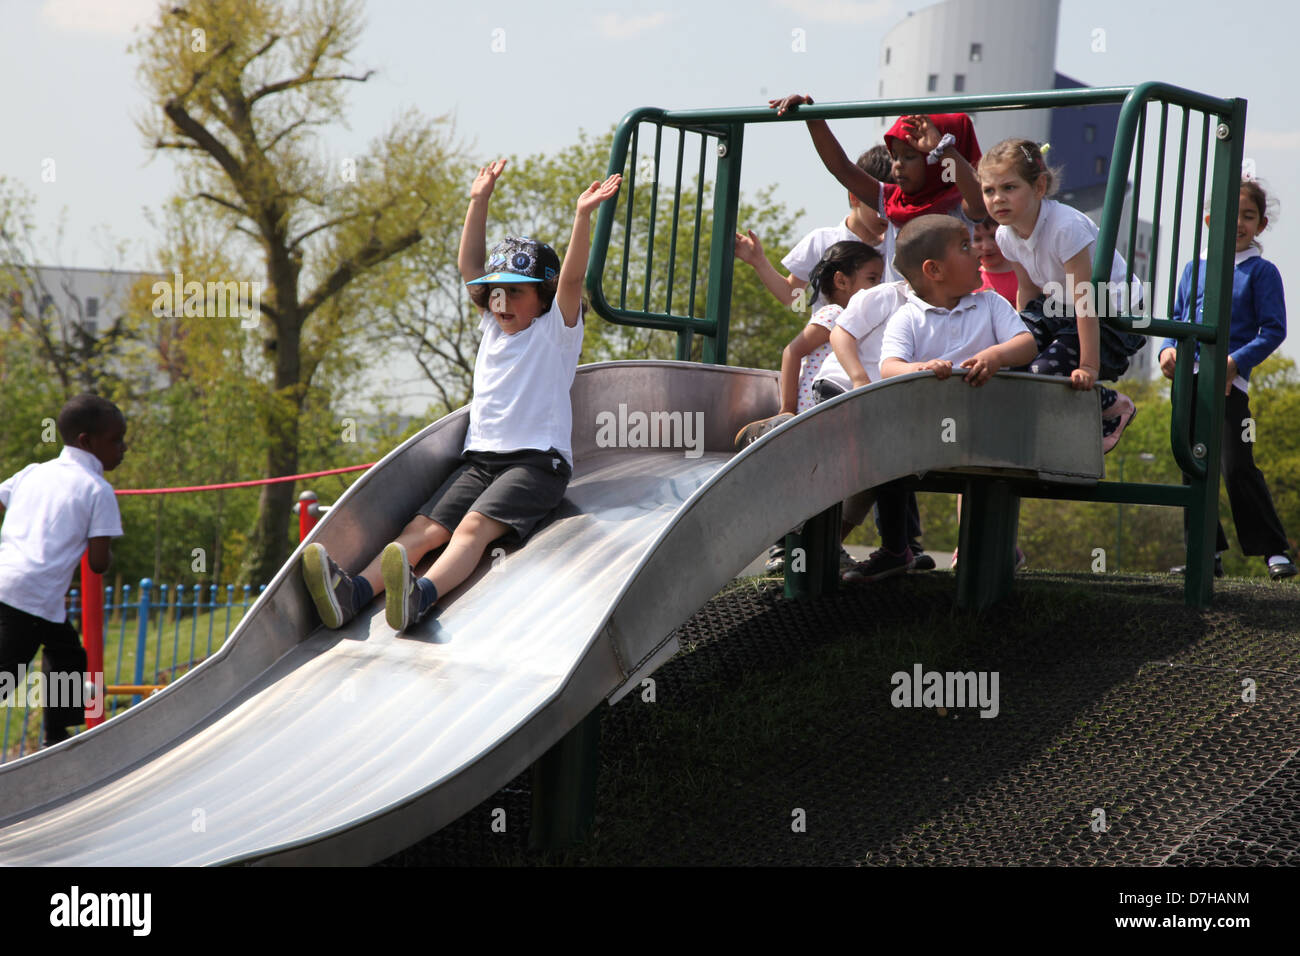 Children playing on a slide in a playground in London Stock Photo